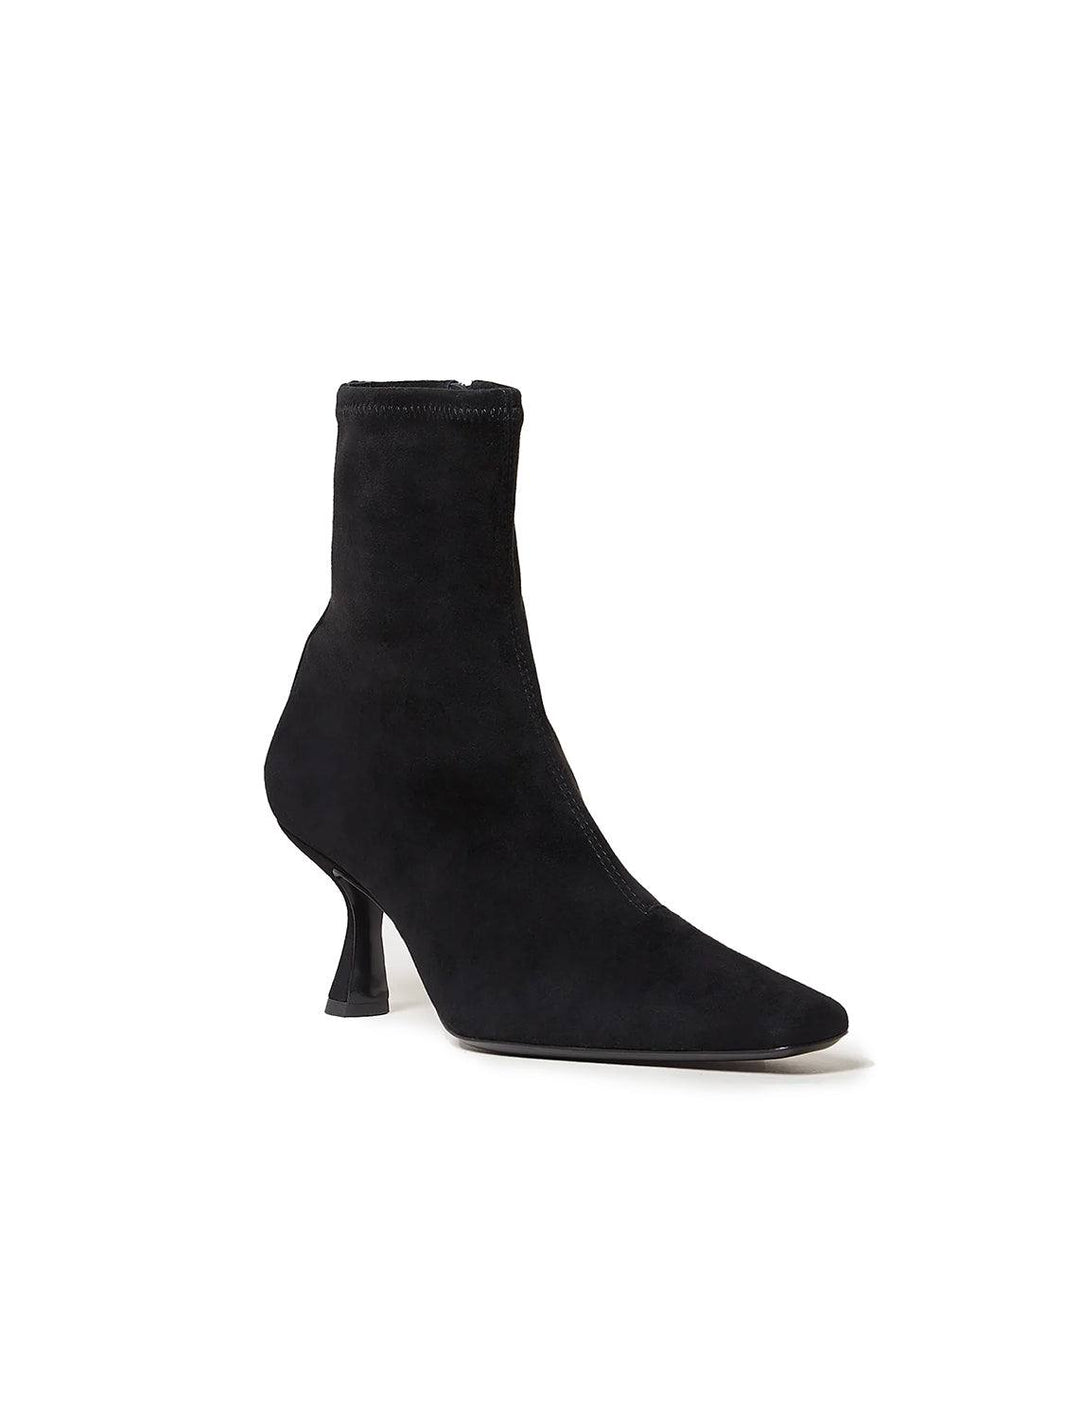 Front angle view of Loeffler Randall's thandy boot in black.